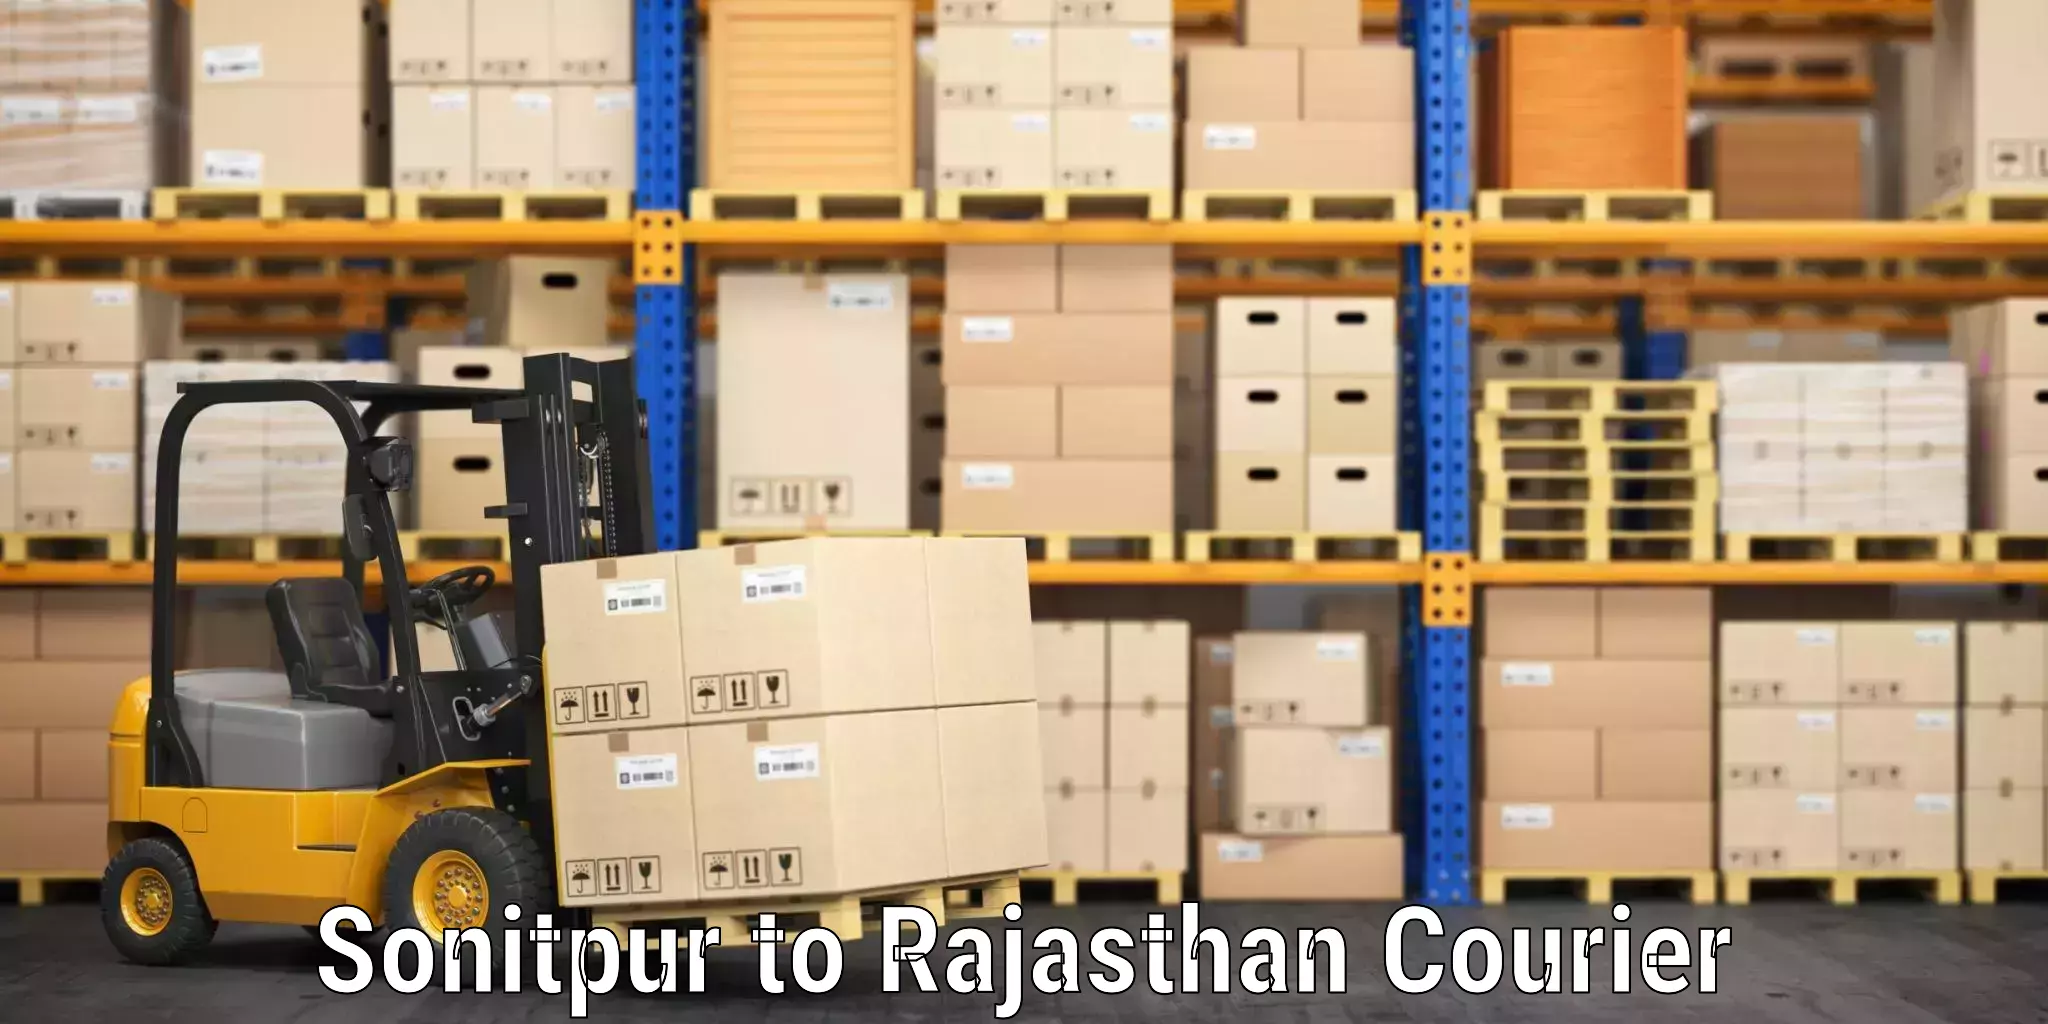 Luggage shipping rates calculator Sonitpur to Fatehpur Sikar